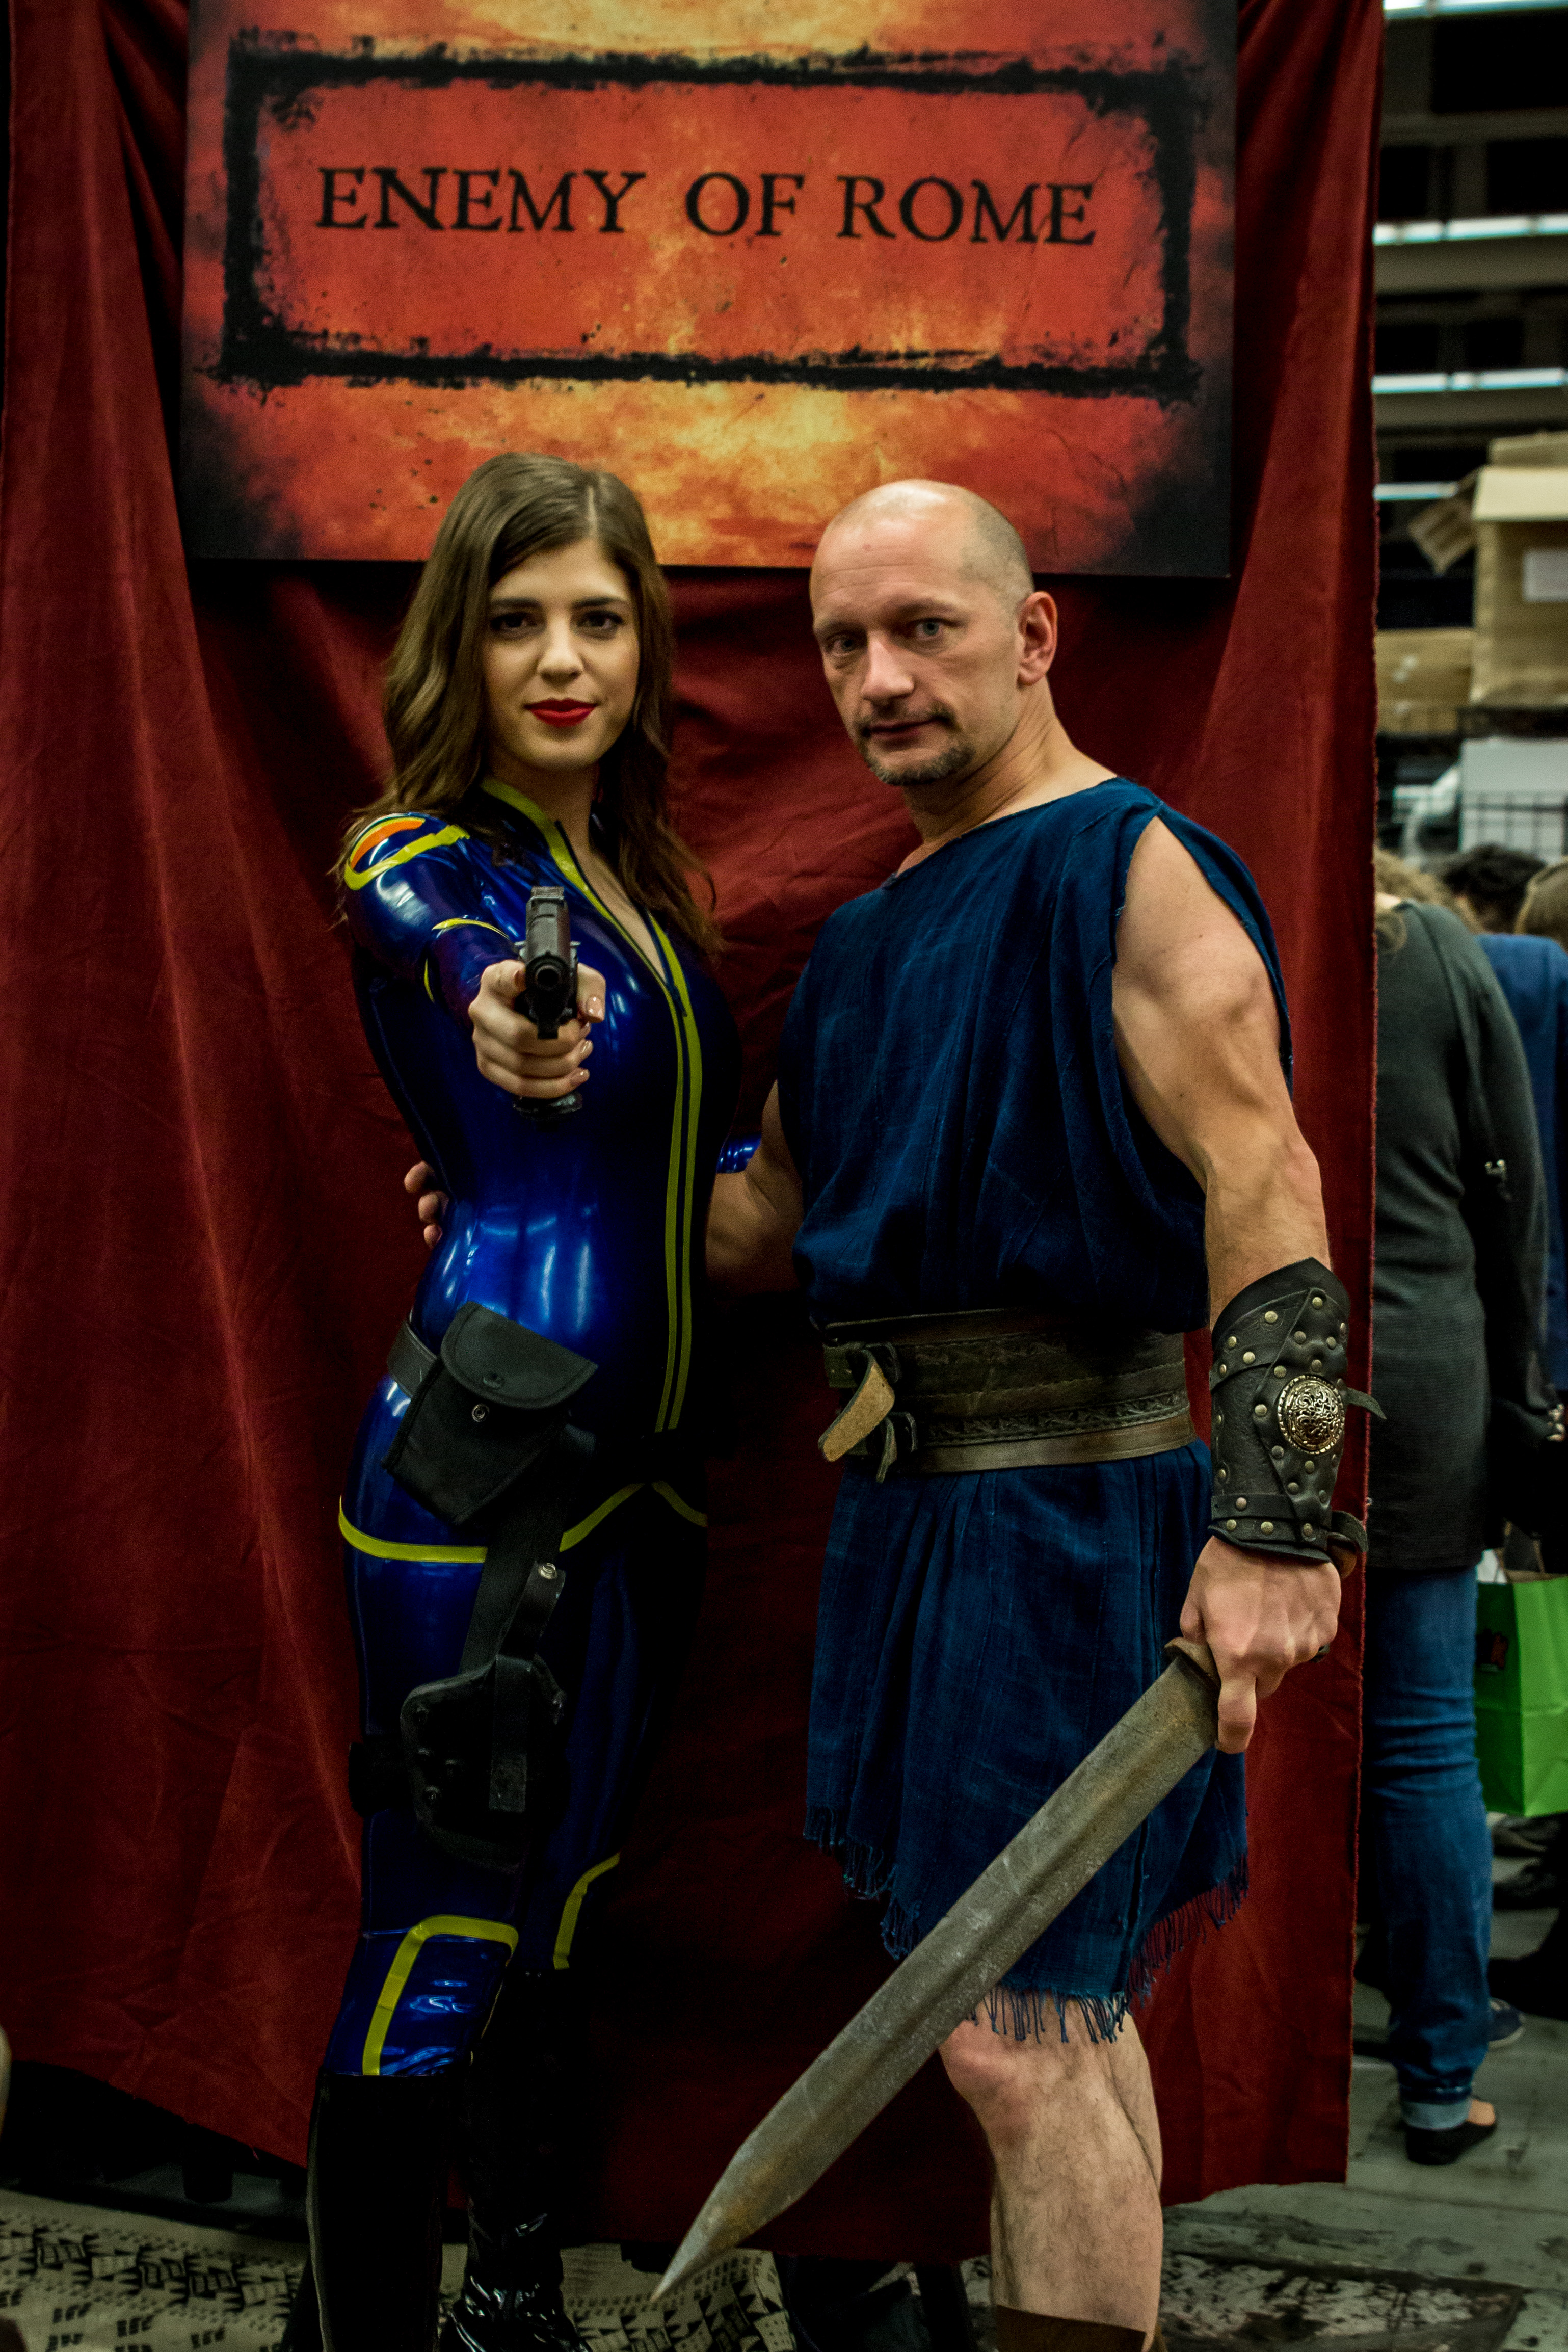 Promoting Enemy of Rome at Montreal ComicCon with actress and model Sandra Belrose from Heroes of the North